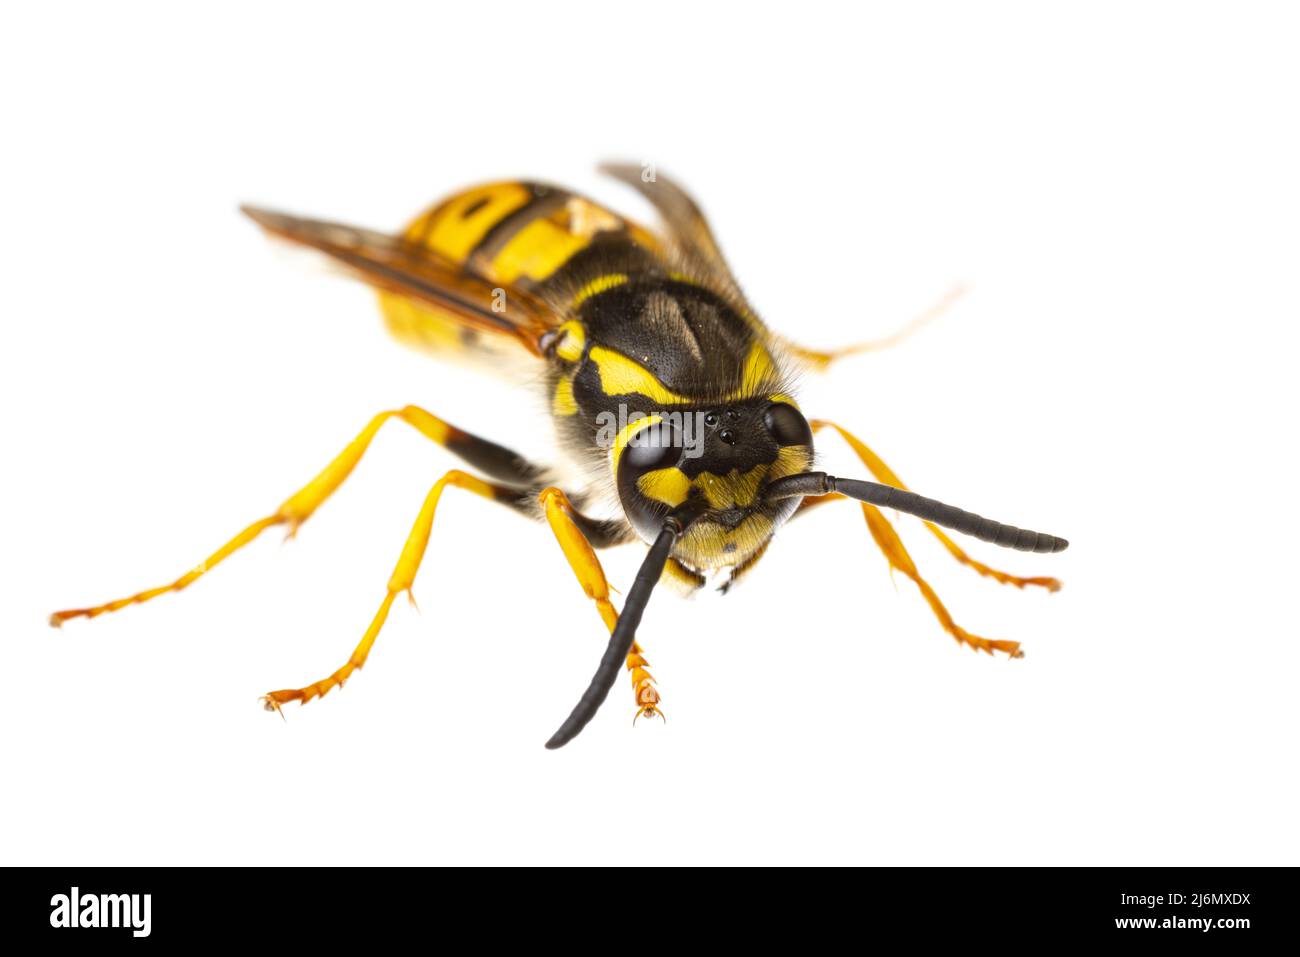 insects of europe - wasps: macro of Vespula germanica  german wasp european wasp  isolated on white background  diagonal view Stock Photo